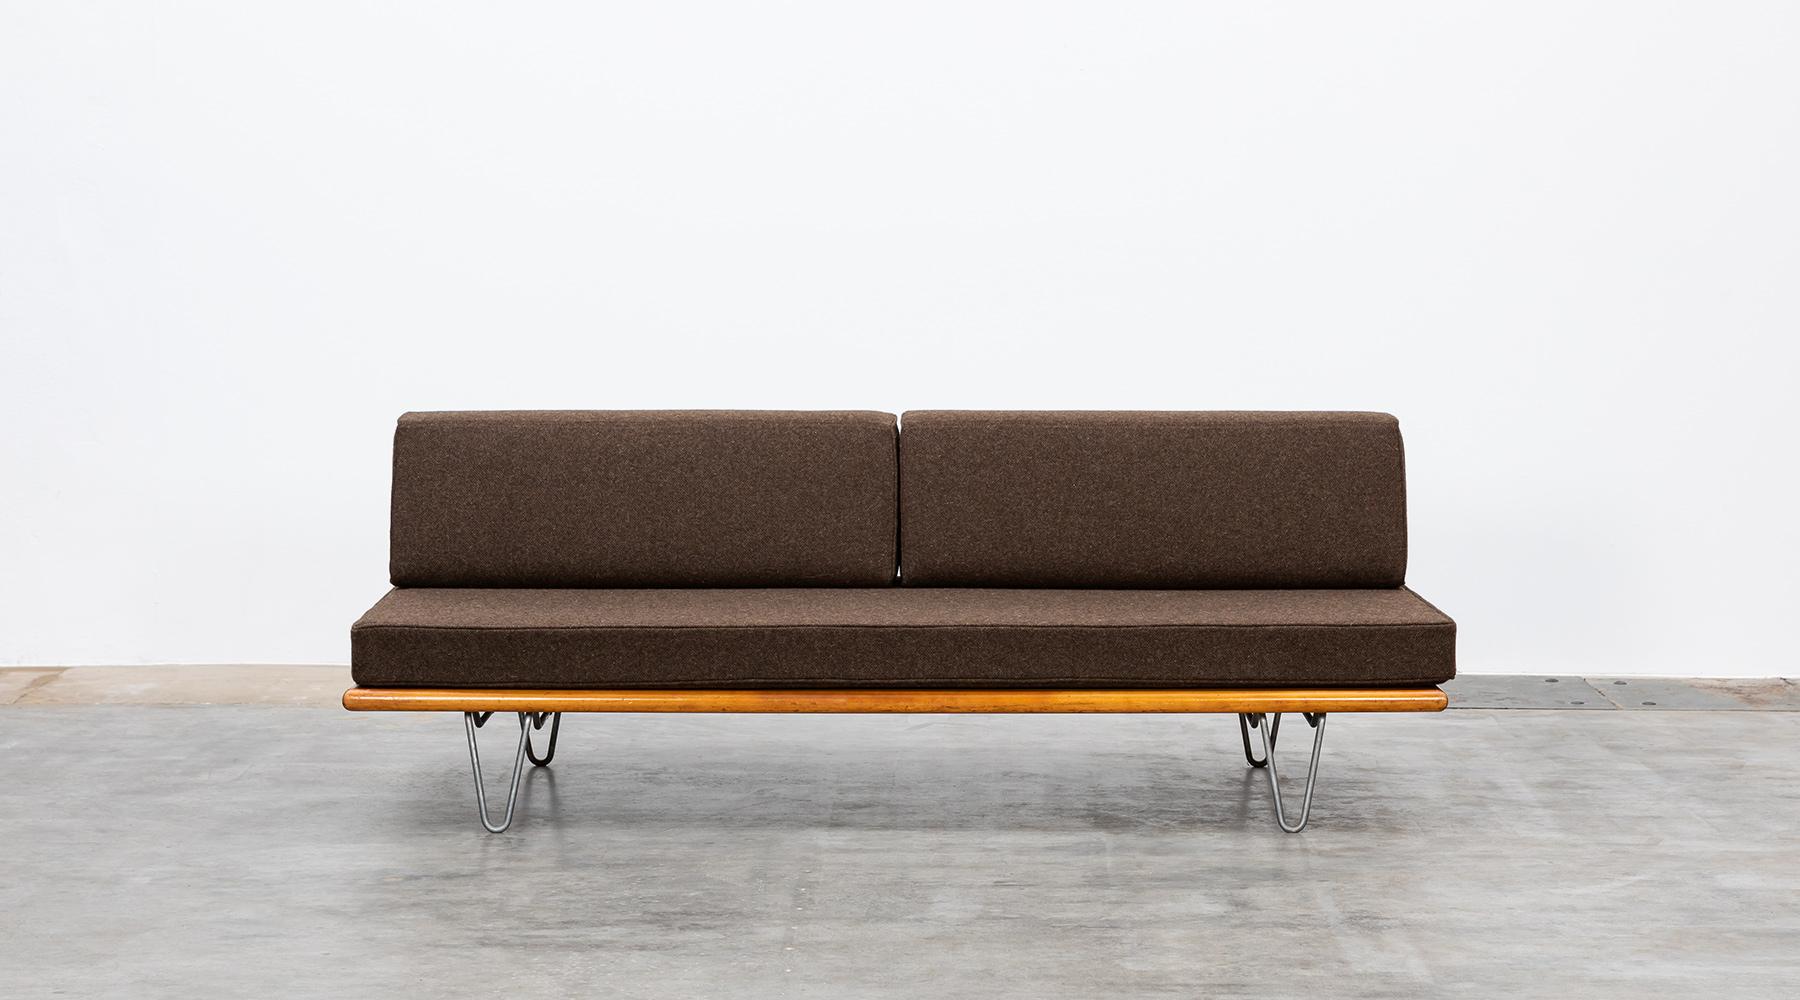 Daybed by George Nelson, new upholstery on wooden frame and metal legs, USA, 1950.

The daybed designed by George Nelson is newly upholstery with high-quality fabric and comes on a wooden base on metal legs. The Minimalist design gives each room